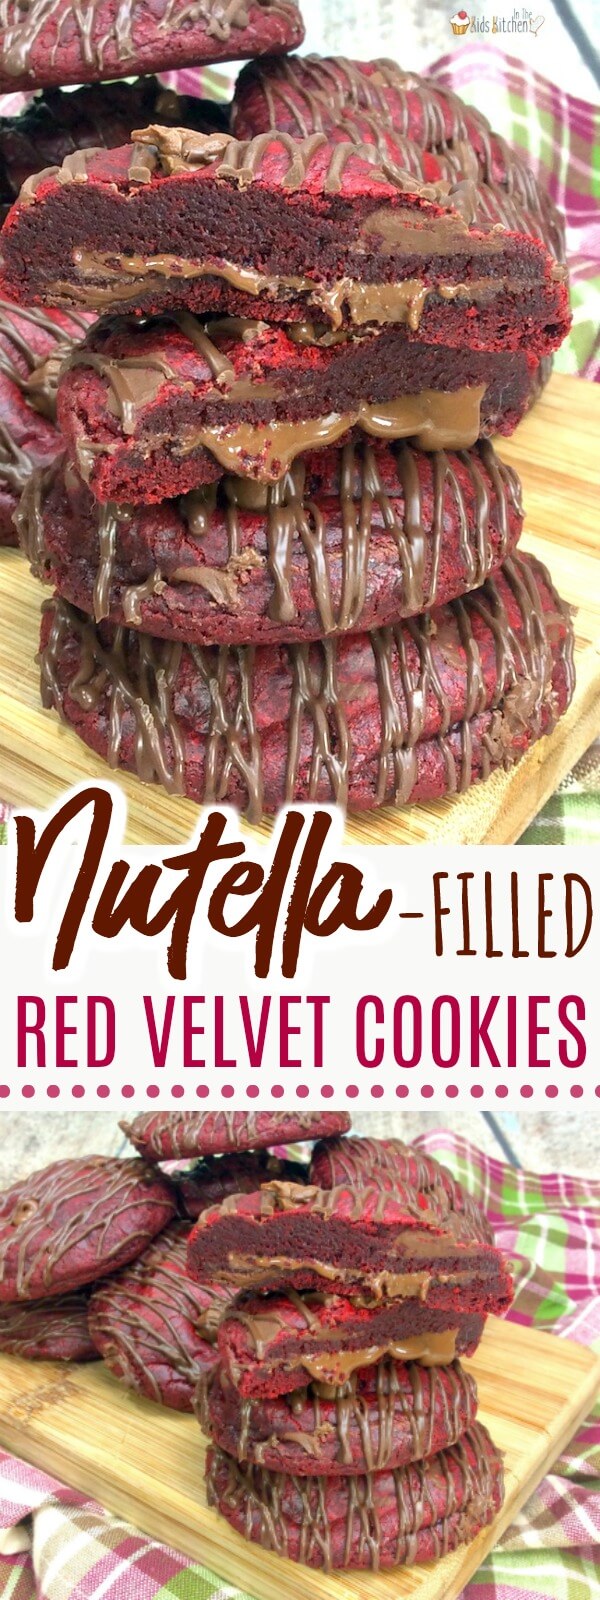 These Nutella Stuffed Red Velvet Cookies are the ultimate decadent Valentine's Day (or anytime) dessert! #cookies #redvelvet 